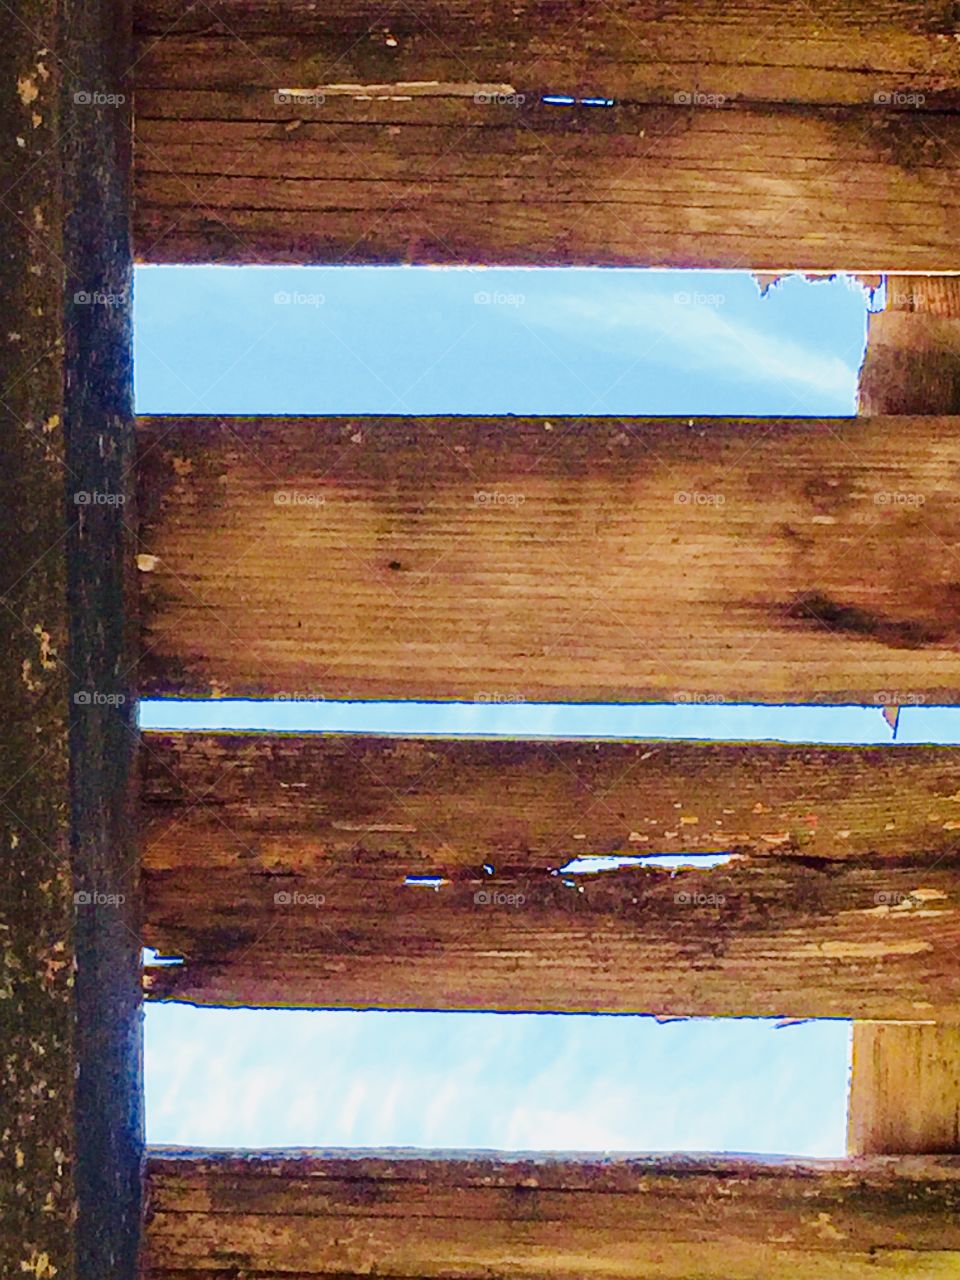 A view of bright blue sky seen through the wooden rafters of an old, weather-beaten structure